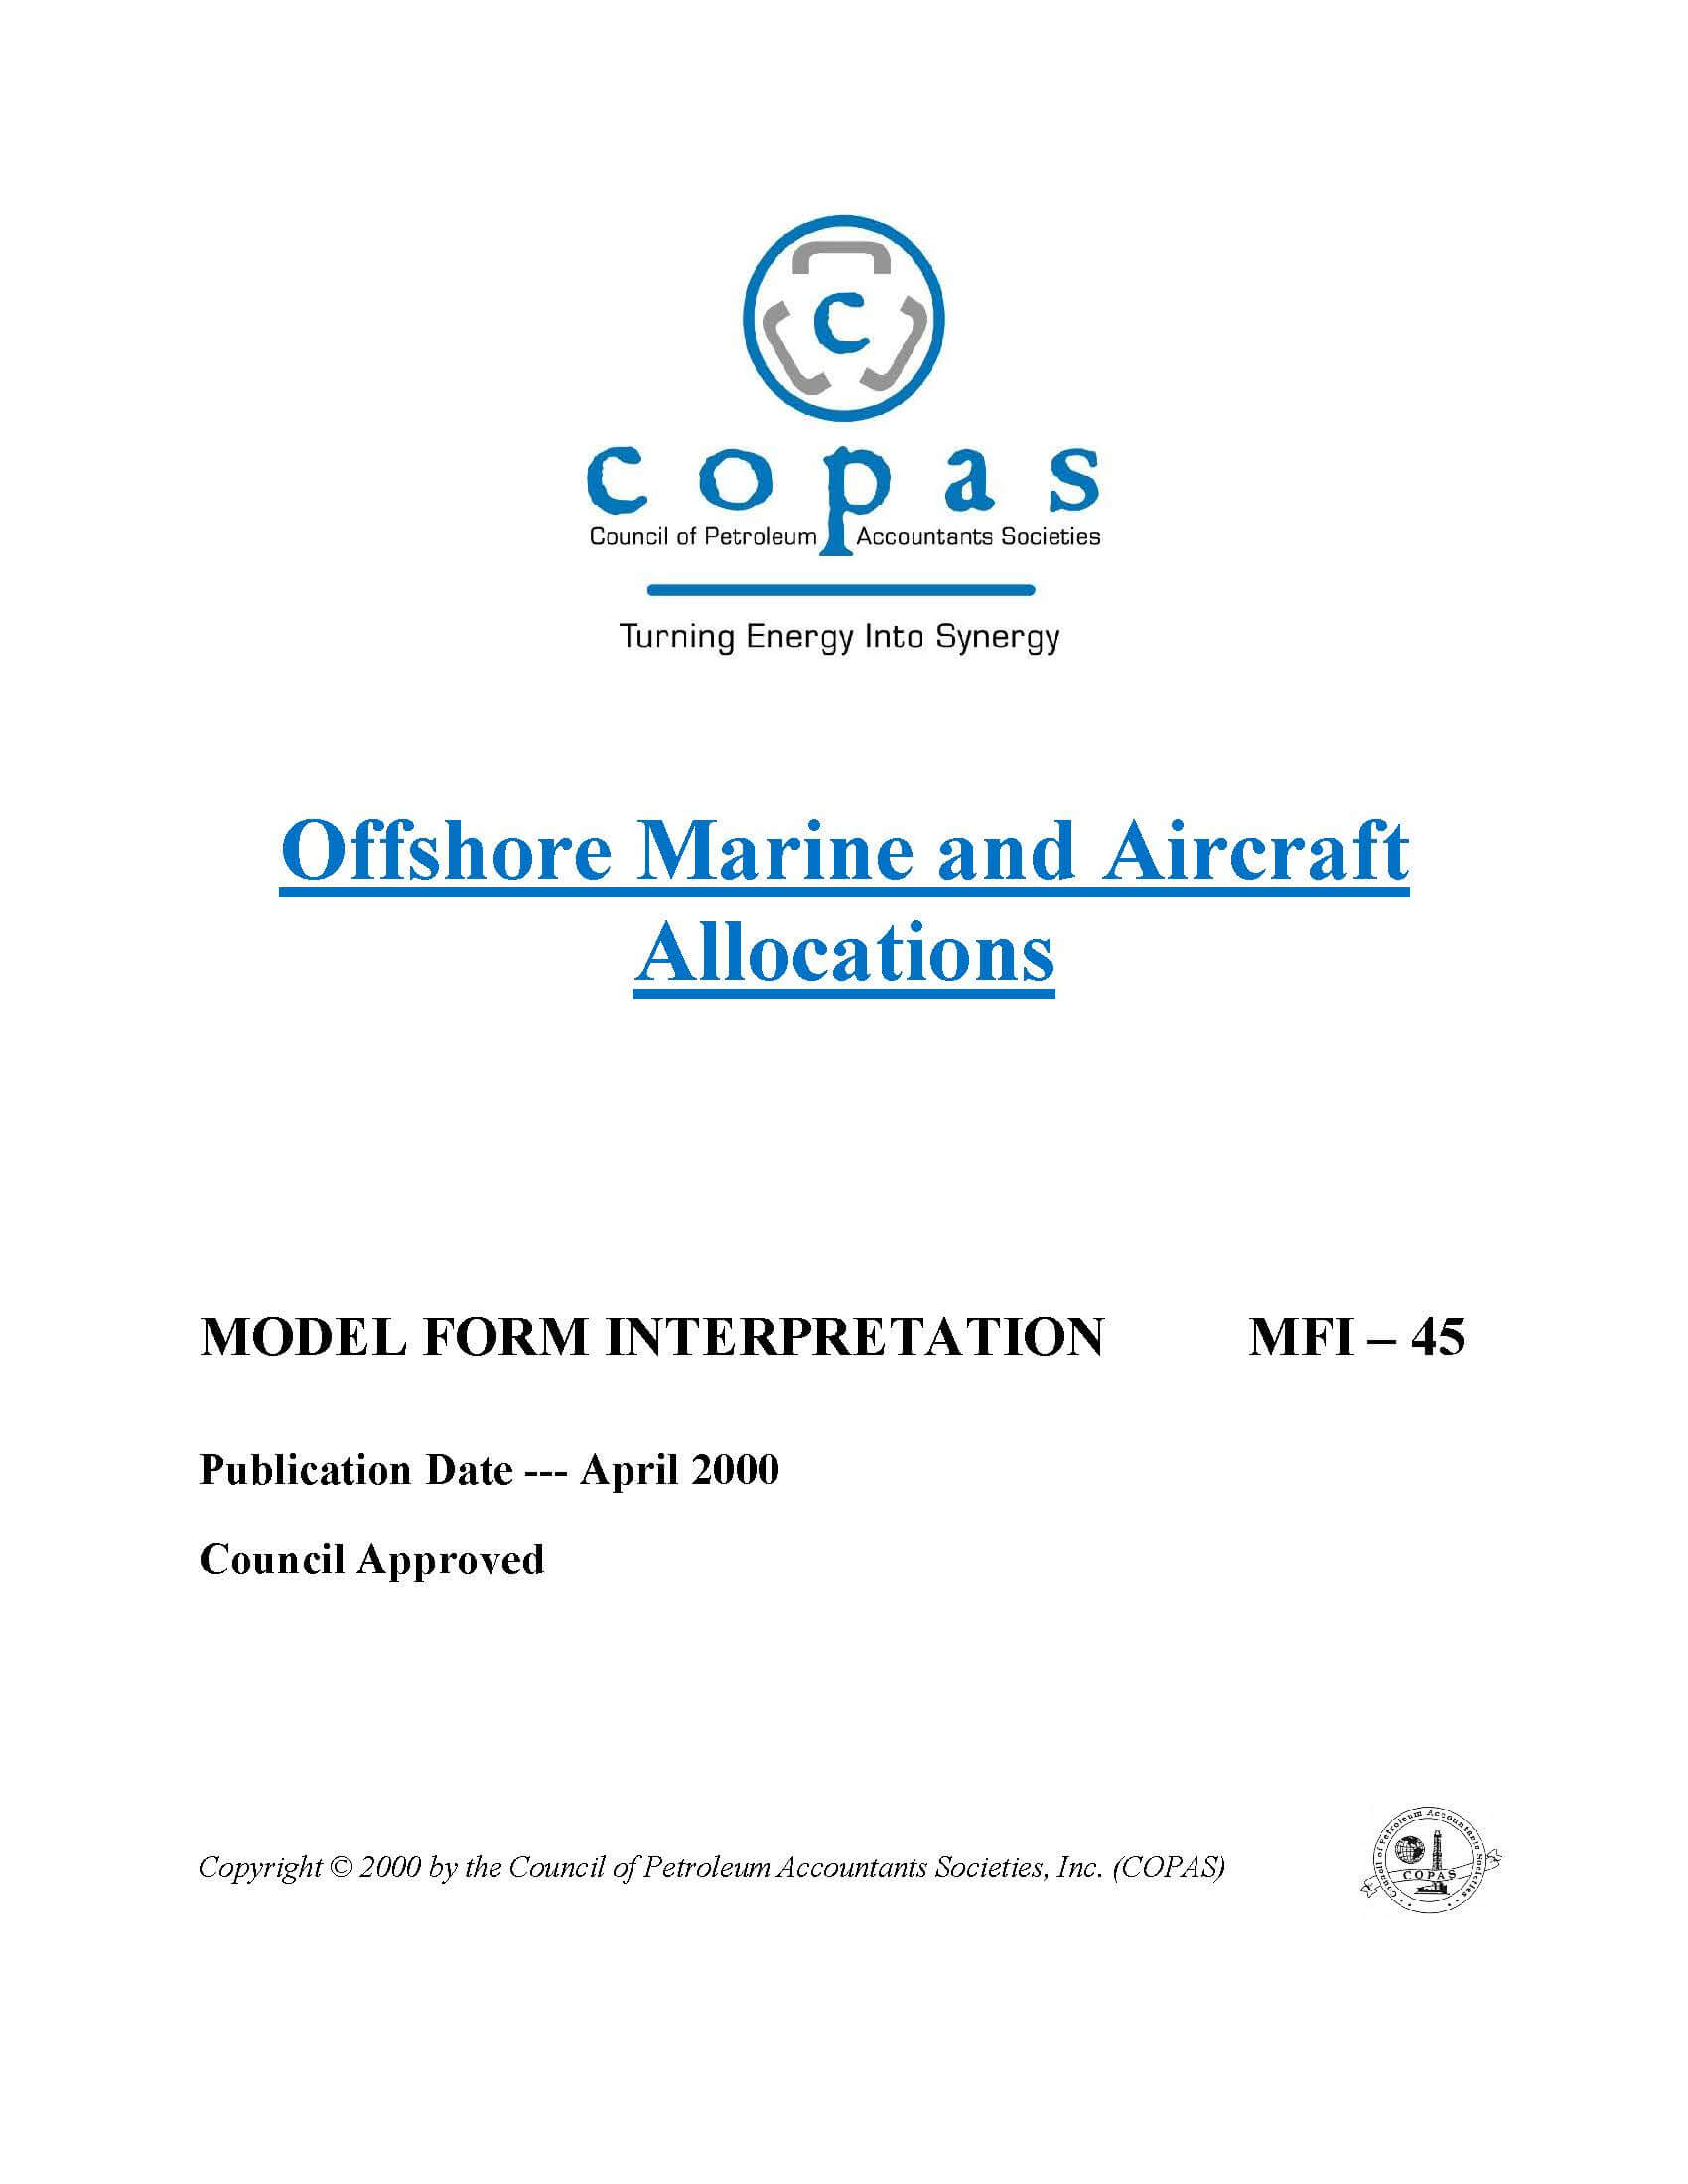 MFI-45 Offshore Marine and Aircraft Allocations